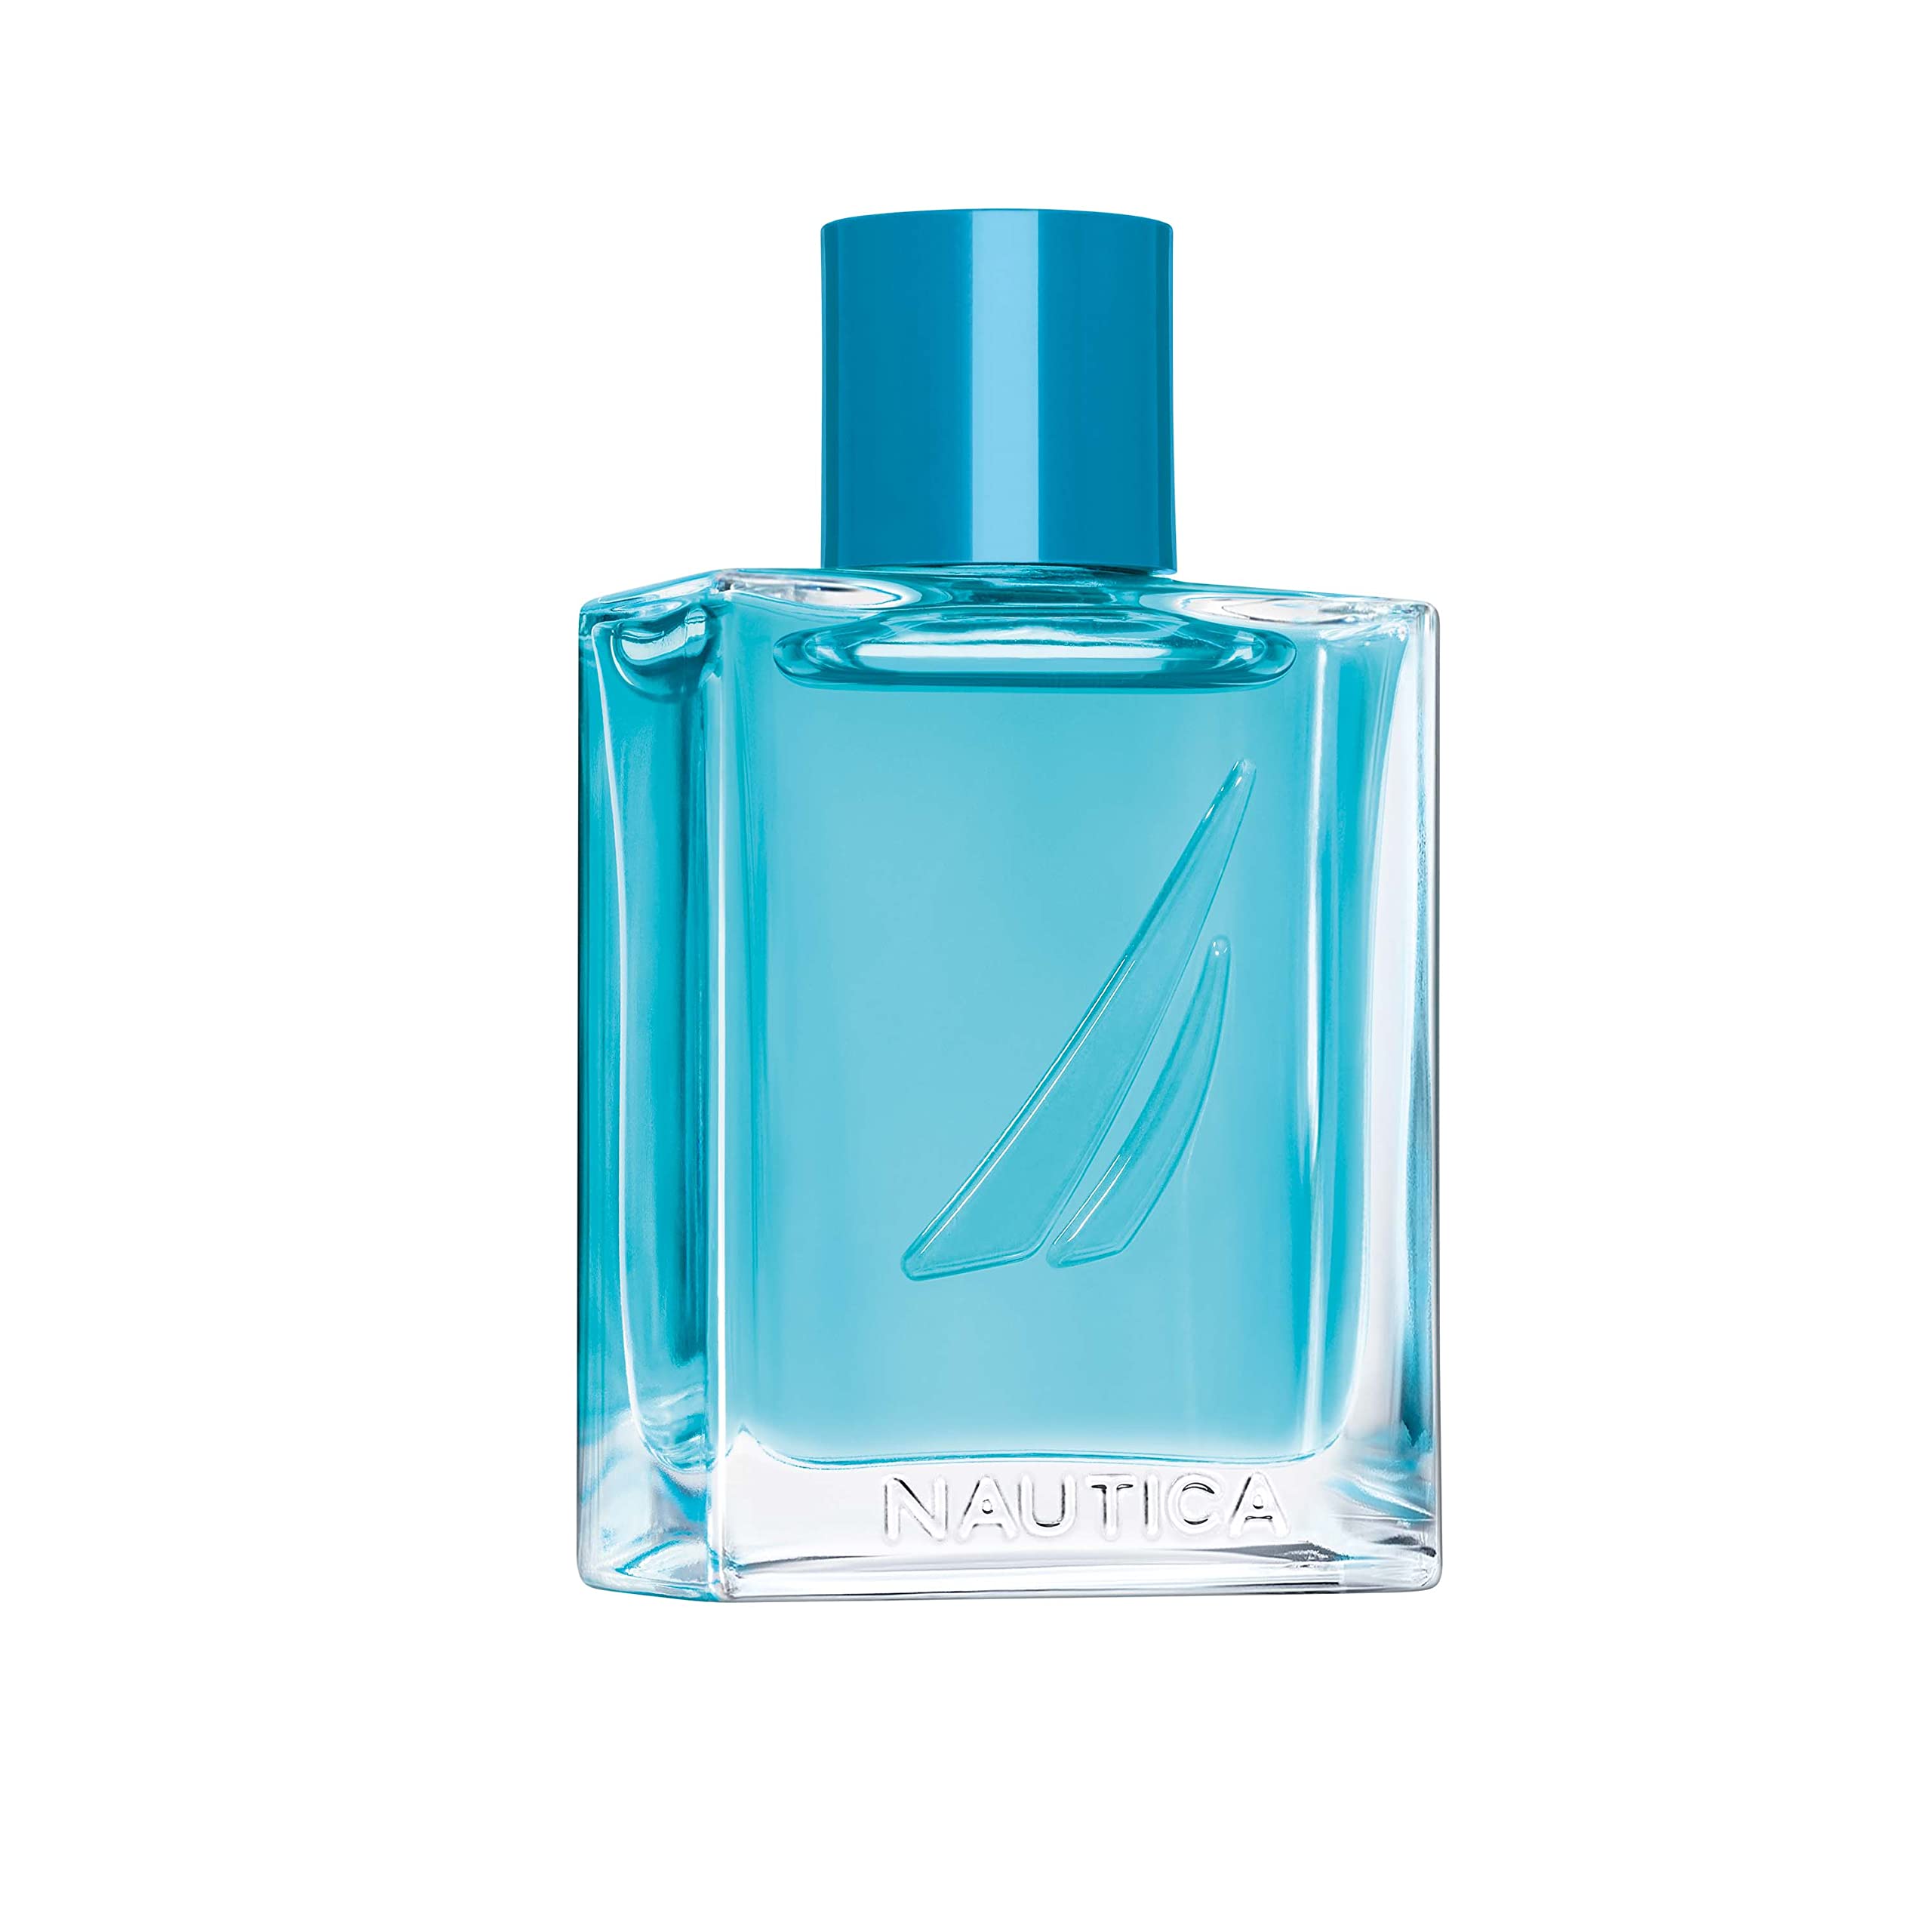 Nautica Oceans Pacific Coast Eau De Toilette - Uplifting, Refreshing Scent - Earthy, Marine Notes of Pinewood and Mint - Ideal for Day Wear - 1.6 Fl Oz.